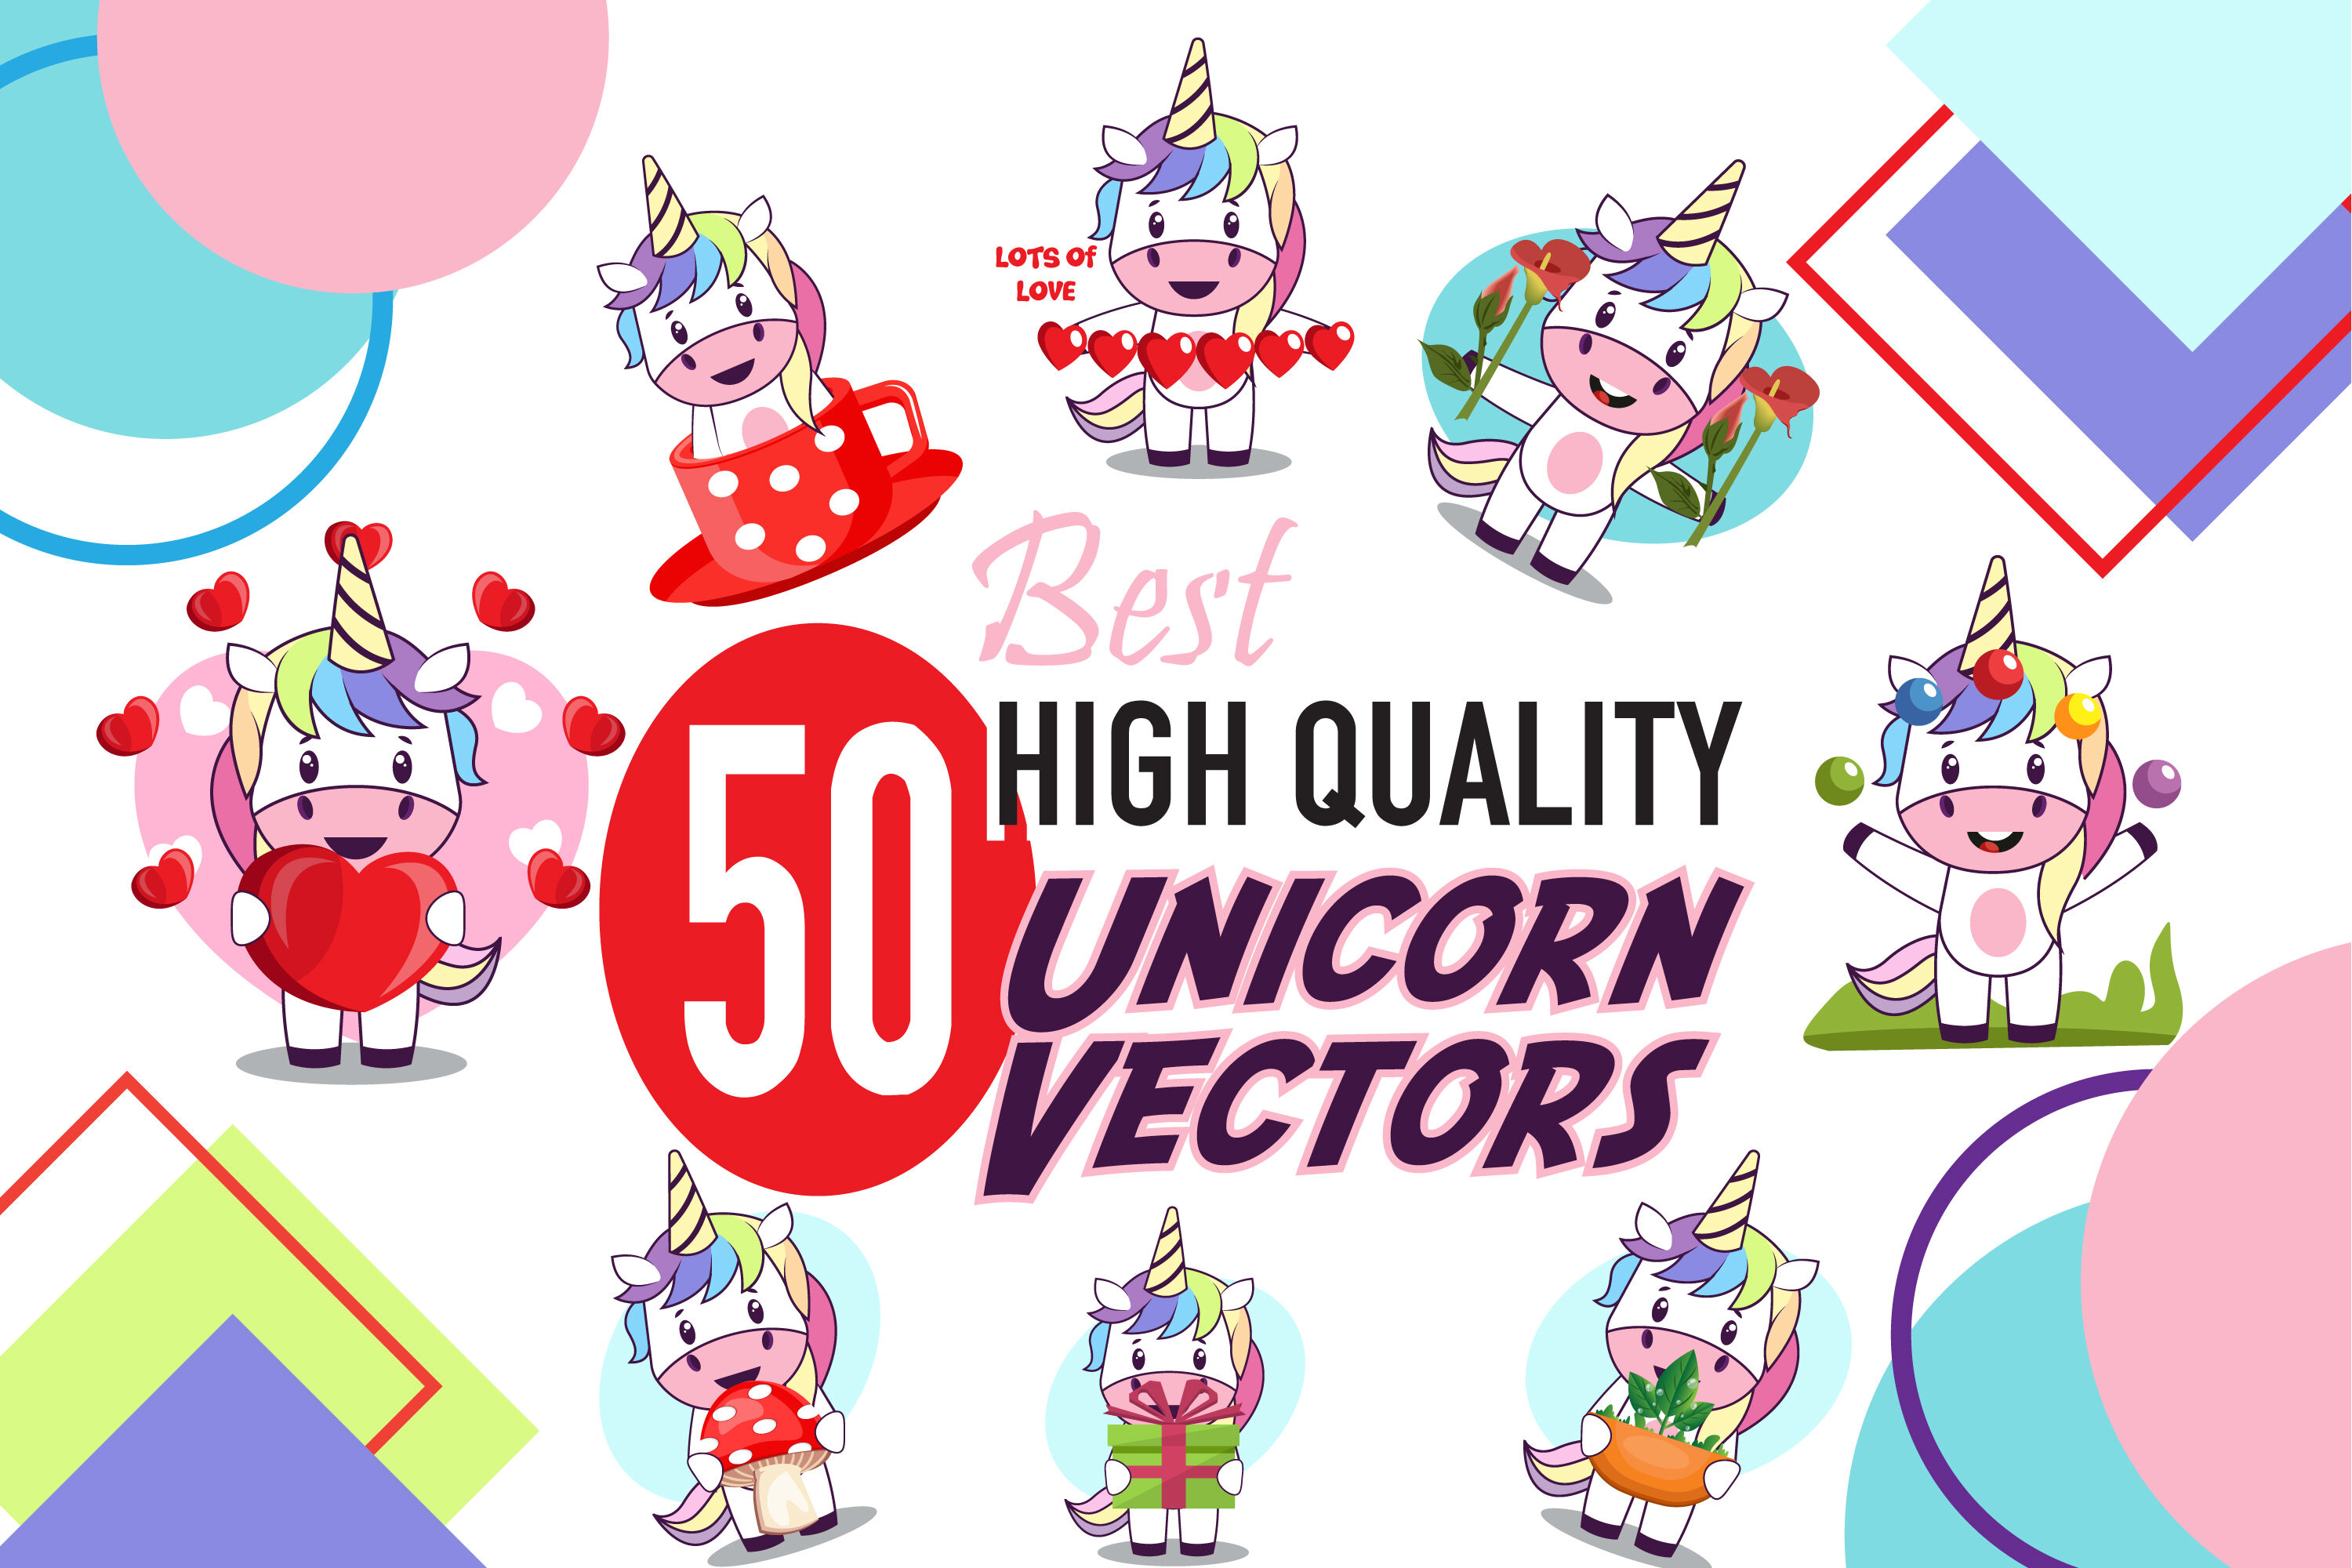 Download 50x Unicorn Character Vector Pack By Morphart ...